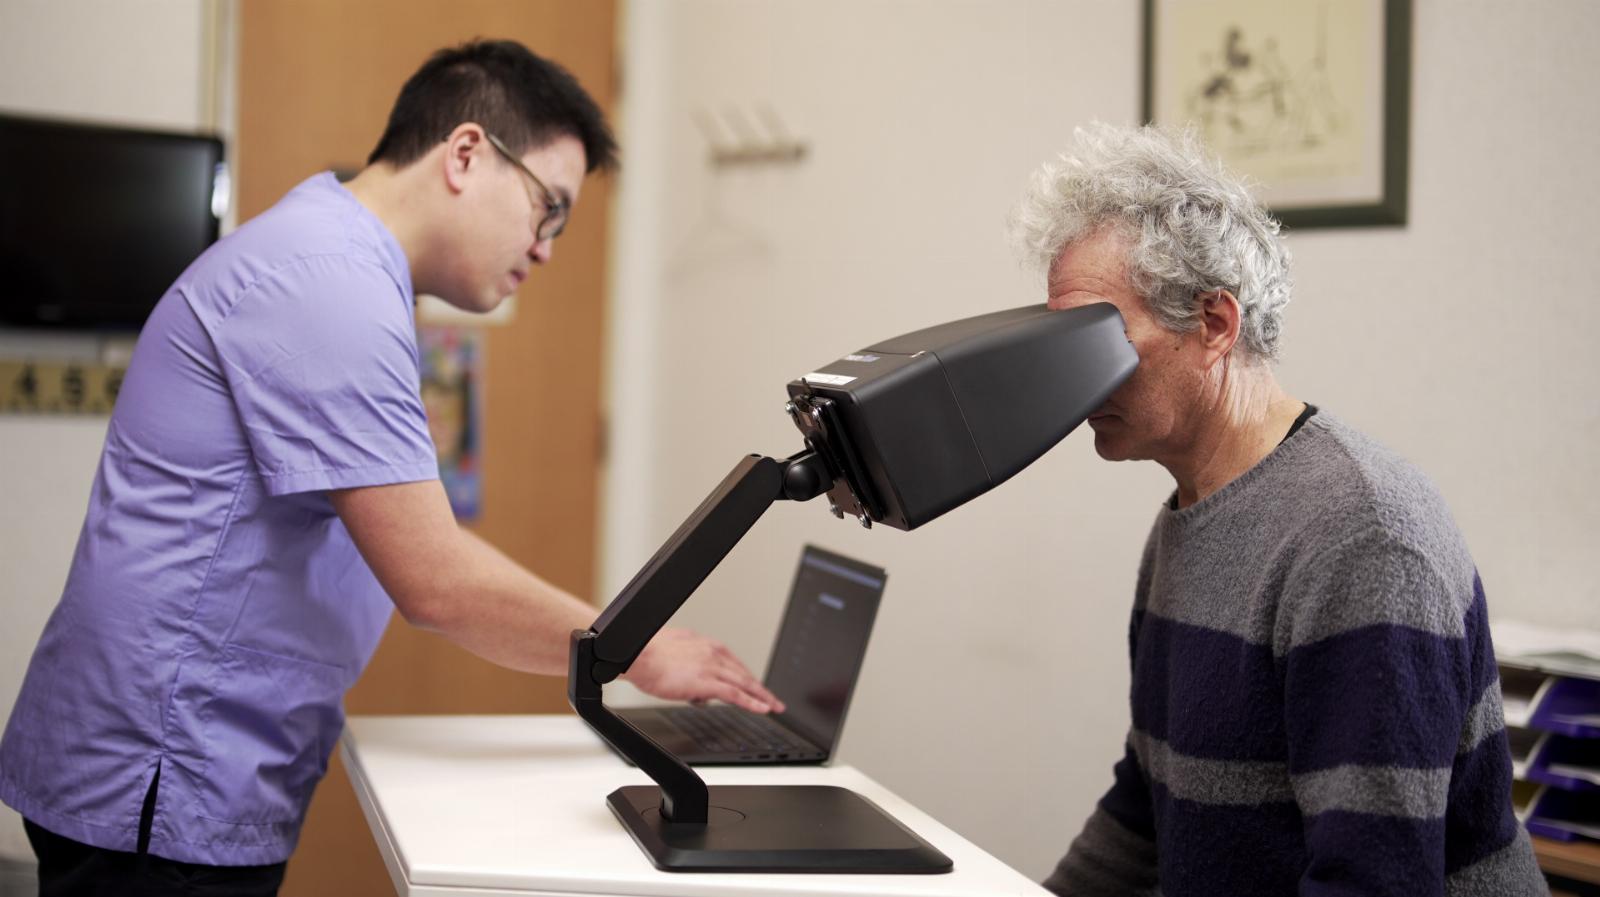 neuroClues wants to put high speed eye tracking tech in the doctor’s office